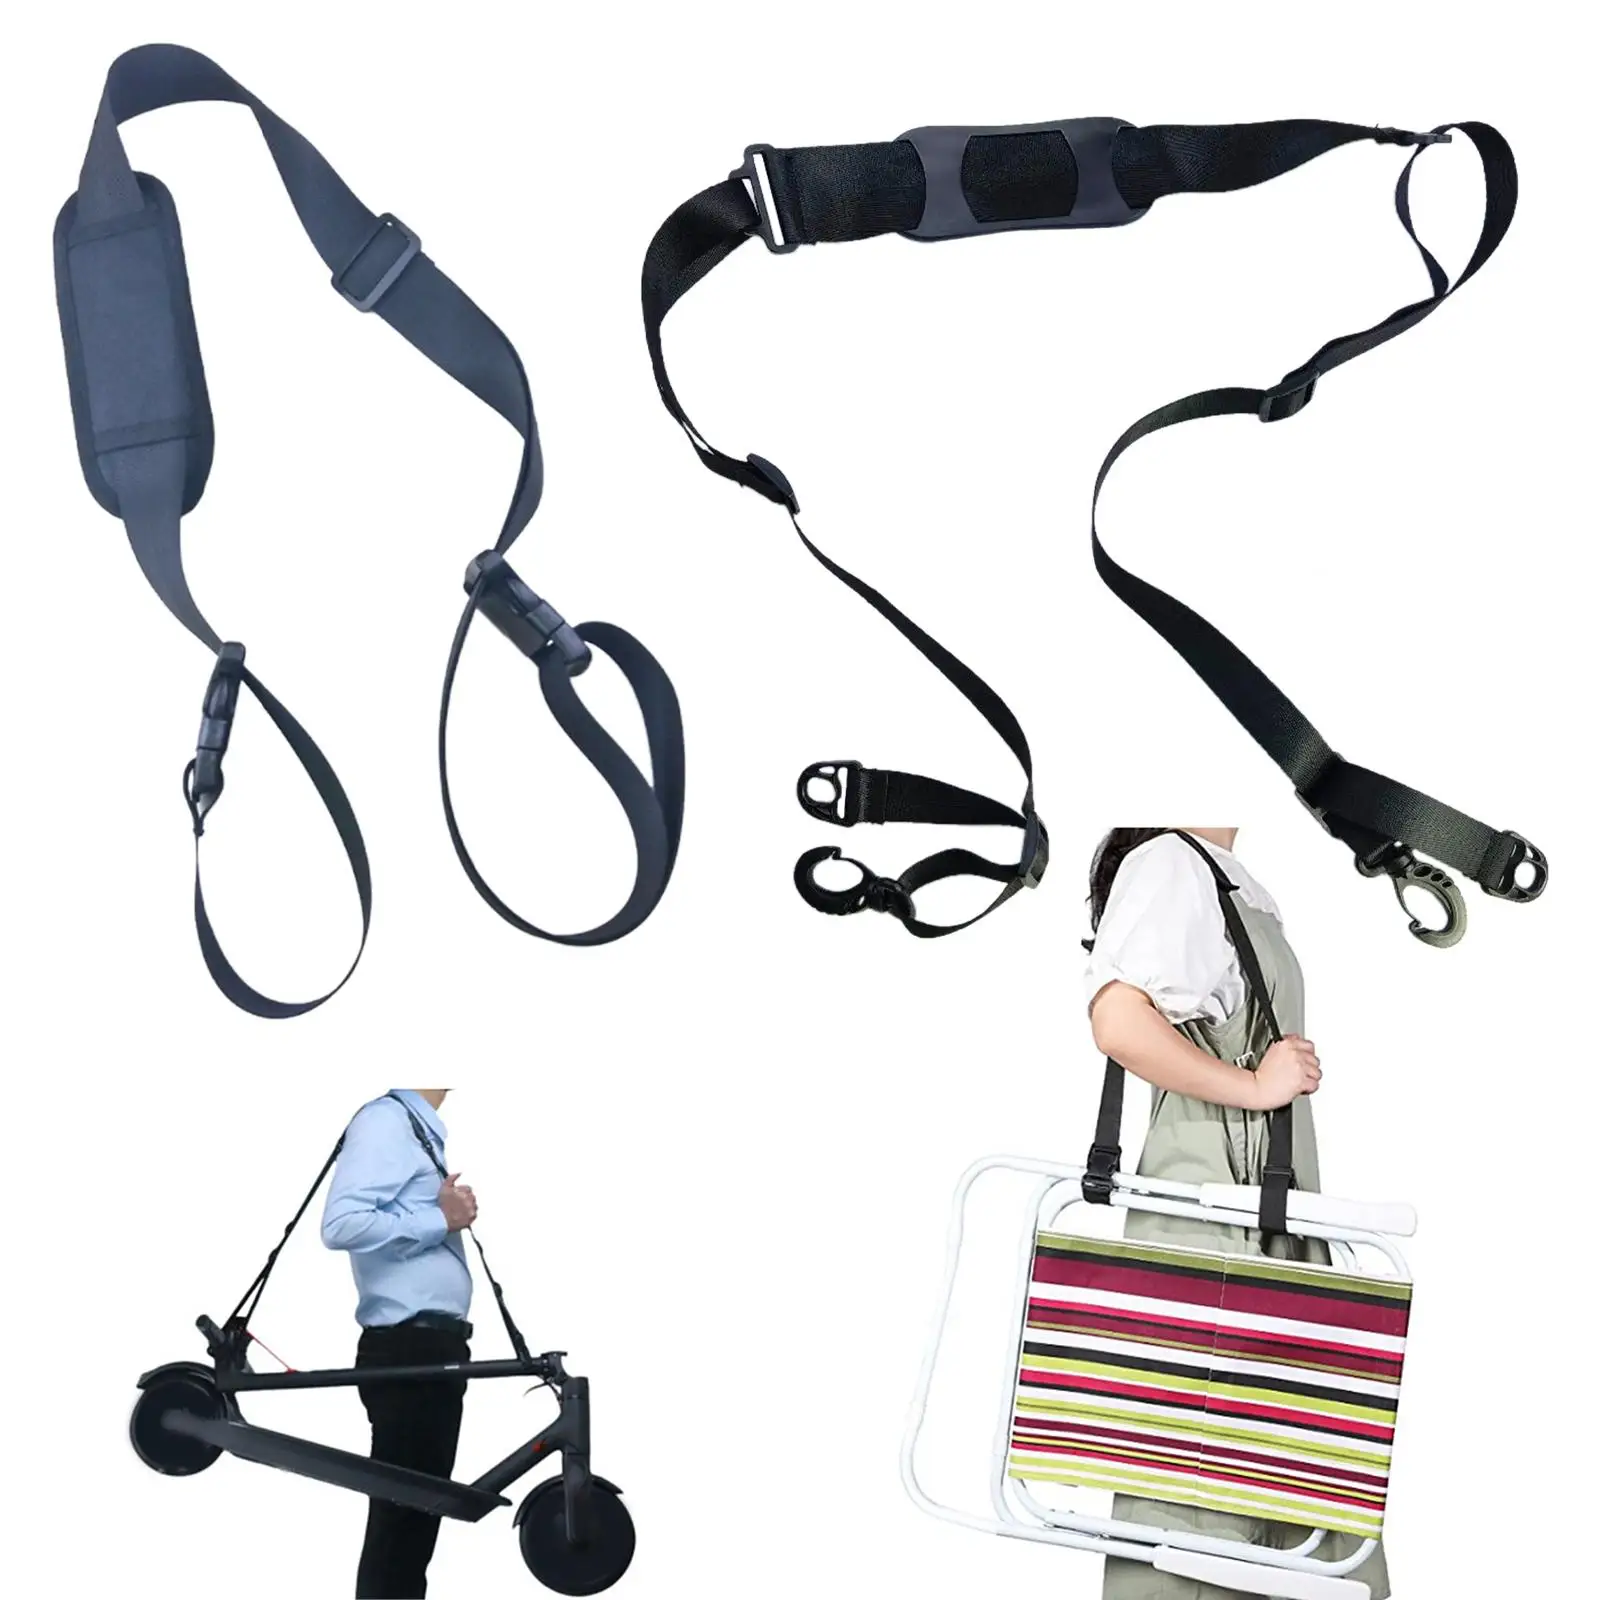 Beach Chair Carry Strap Durable Adjustable Shoulder Strap for Folding Bike Yoga Mat Electric Scooter Skateboard Sport Equipment